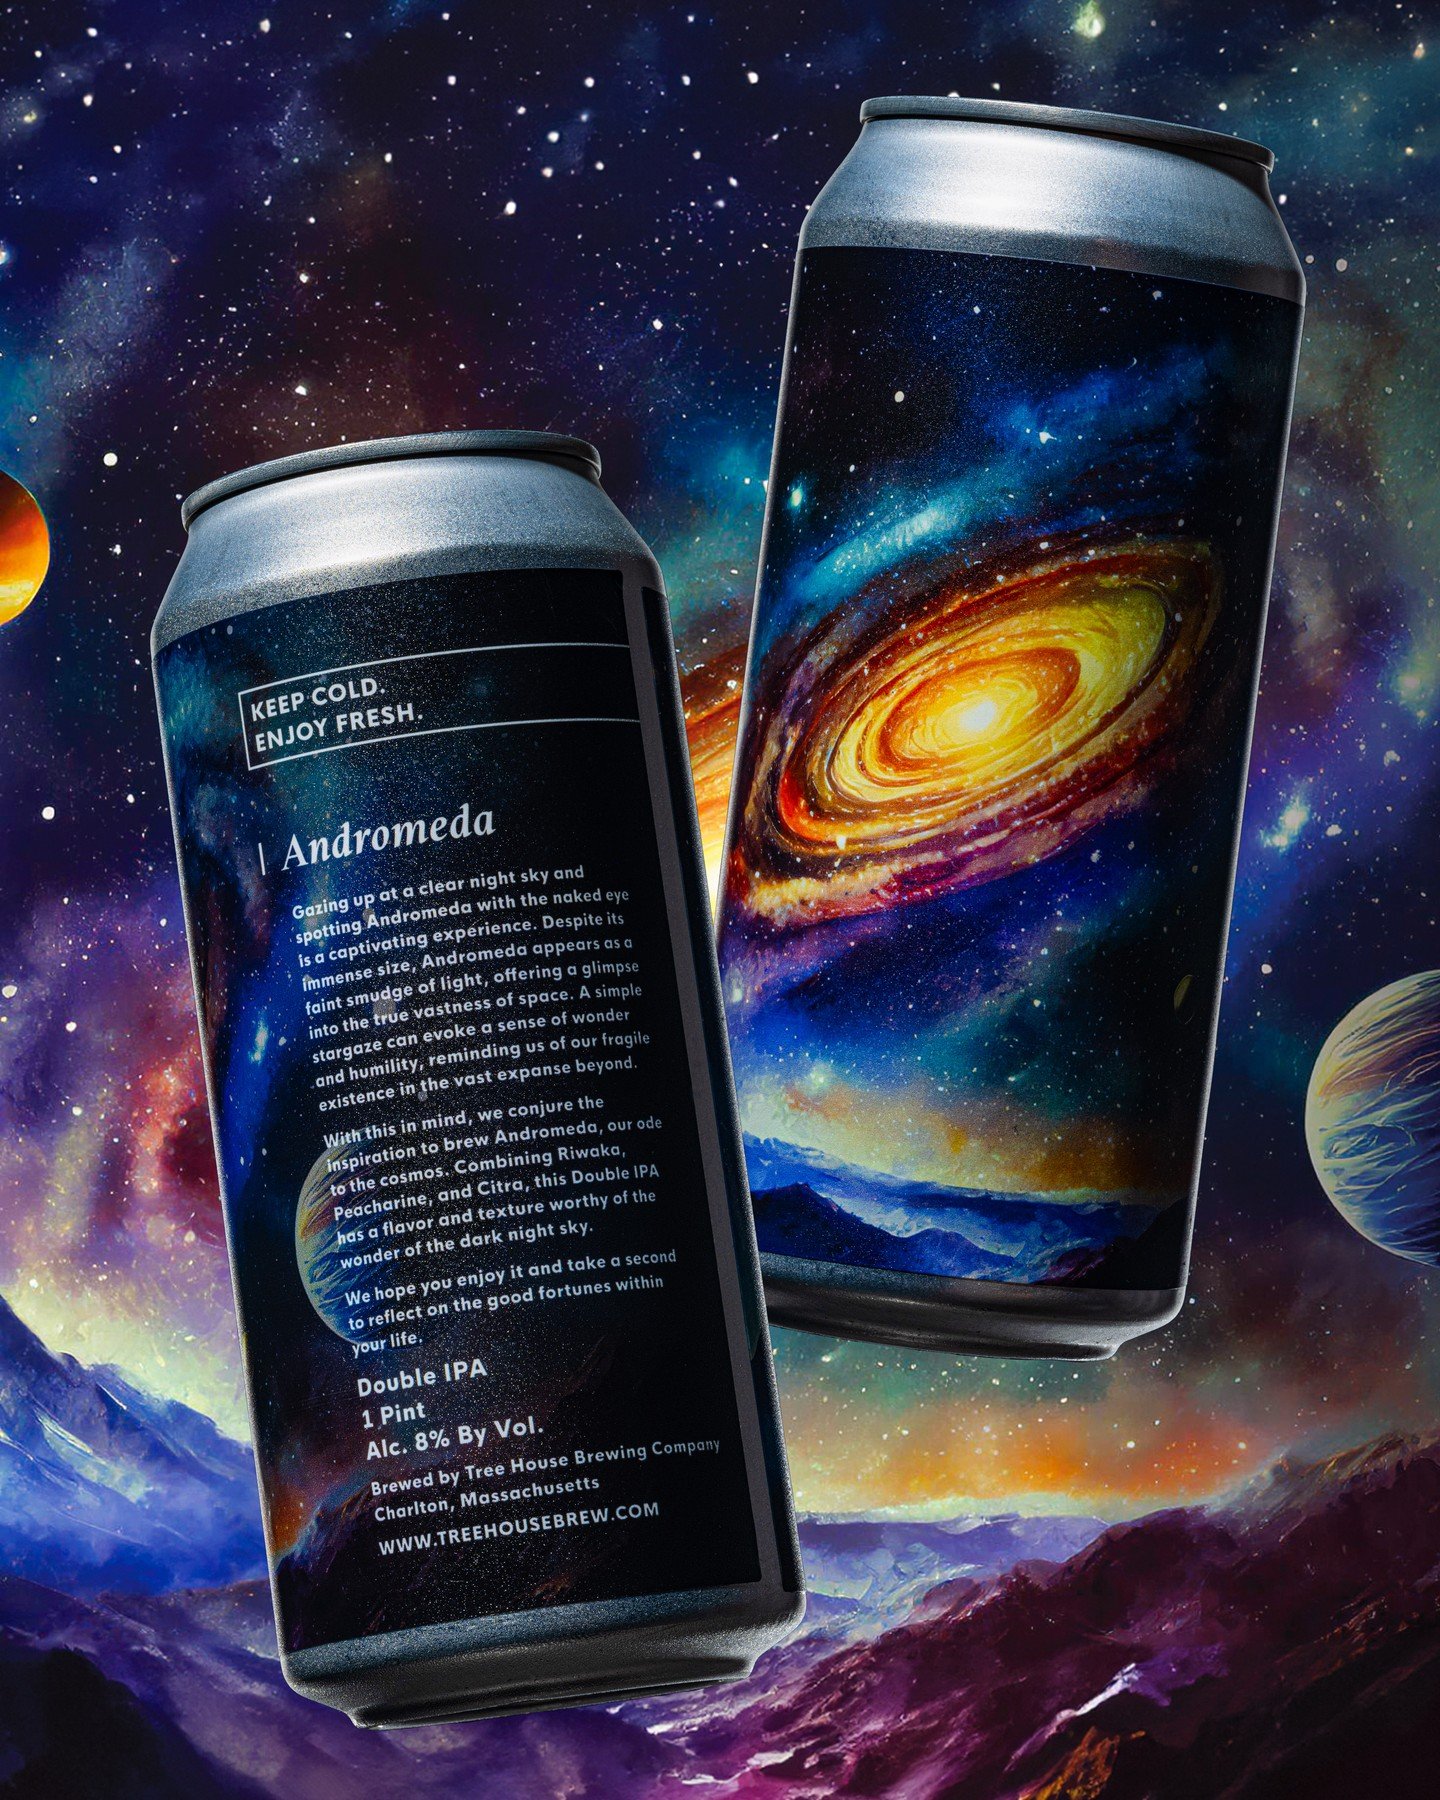 Andromeda was a sleeper hit of 2023, and we could not be more excited to bring it back again for your enjoyment.

Featuring unruly doses of Citra, Peacharine, and Riwaka, this gem expresses the best attributes of these heavily citrus and stone fruit-